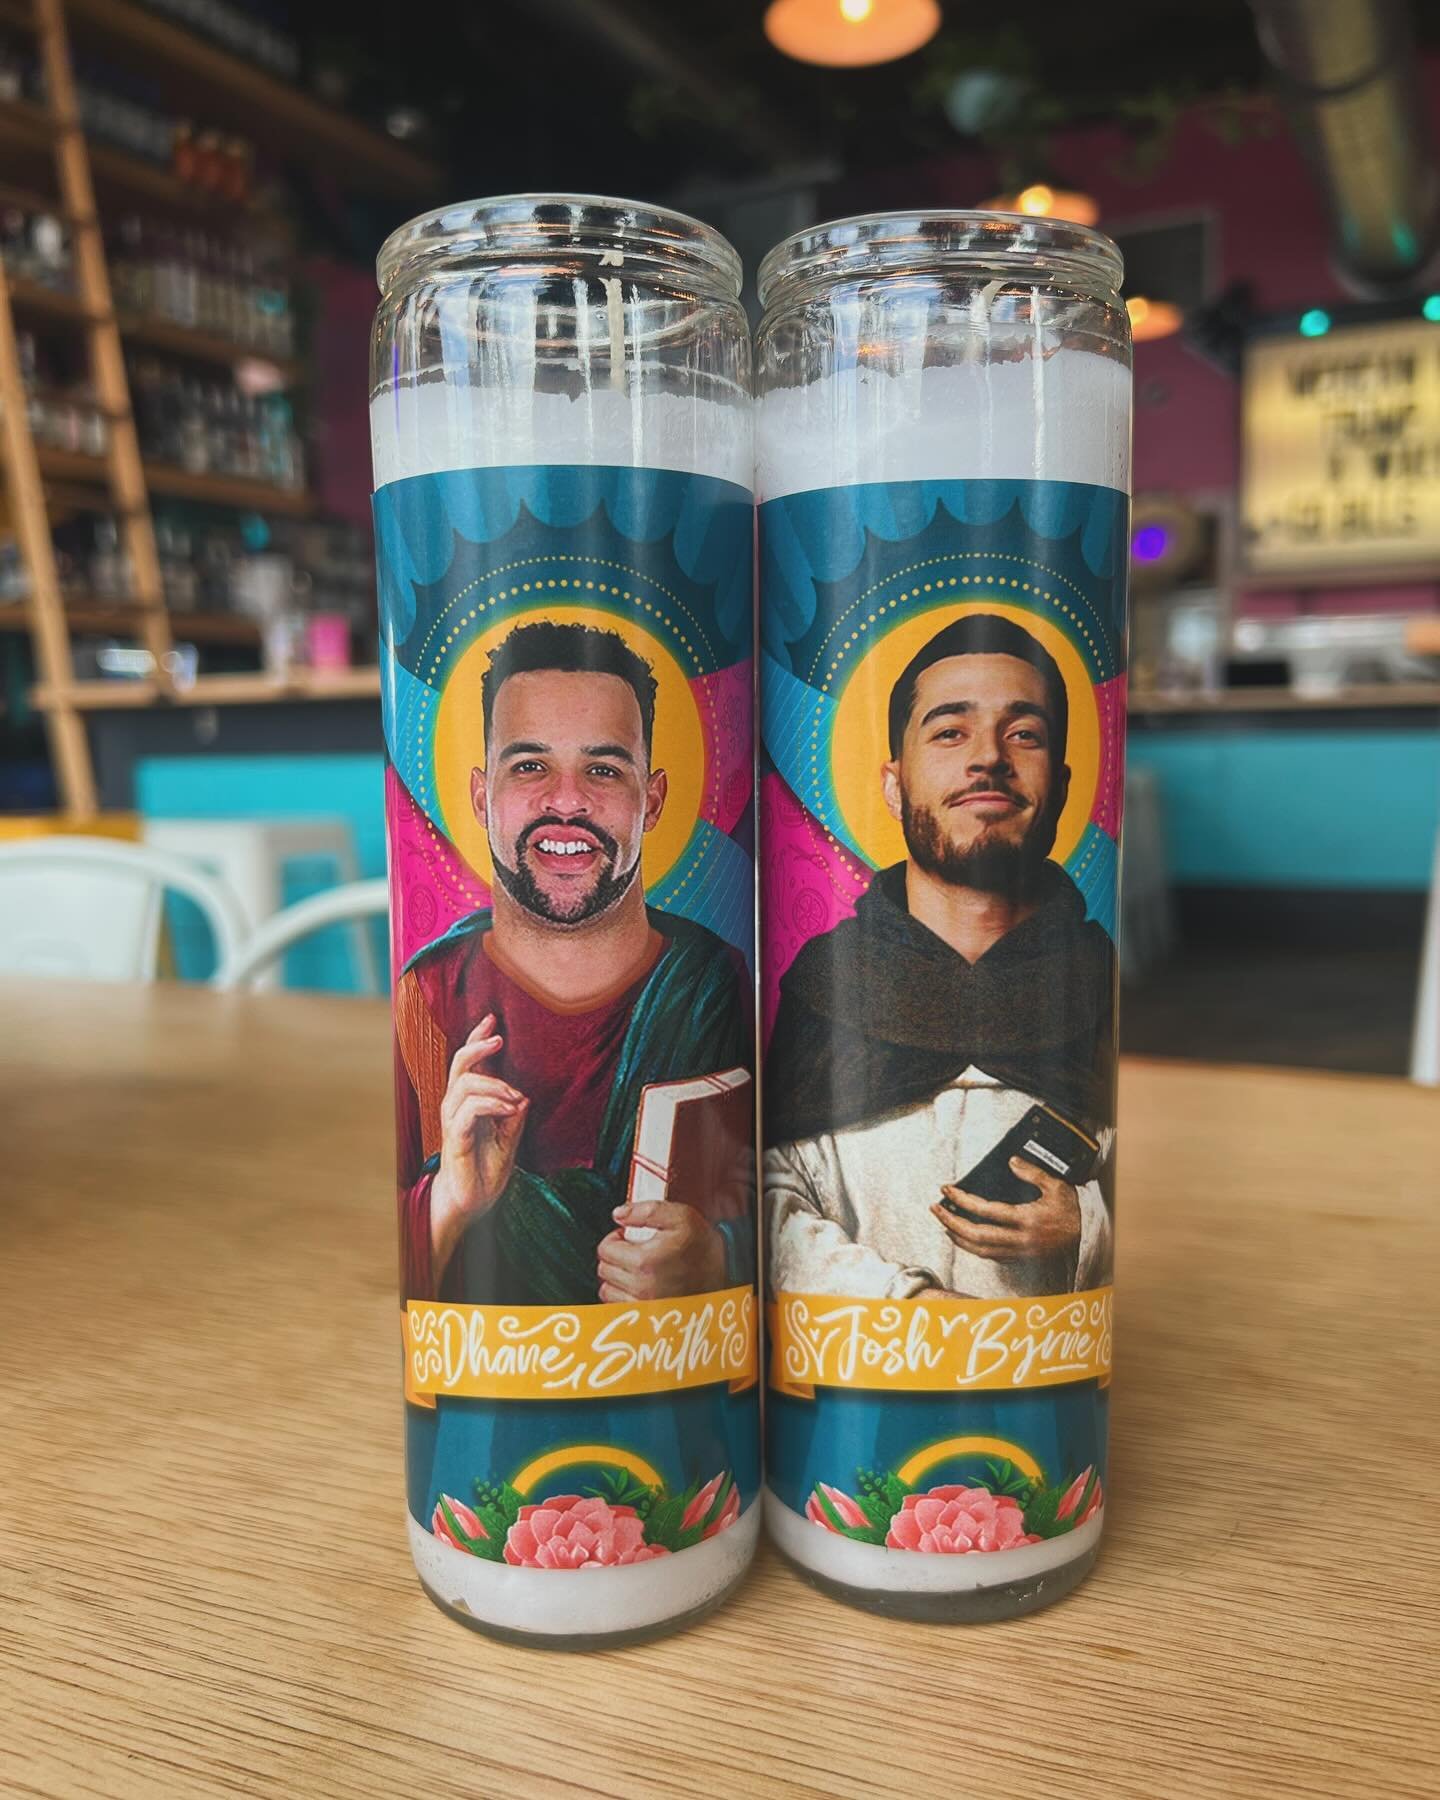 NEW PRAYER CANDLE RELEASE!!! Just in time for @nllbandits FINALS! Welcome to the party @joshbyrne22 and @dhanesmith92! Welcome to Buffalo @keoncoleman3! Welcome Back Coach Lindy Ruff and you already shnow @jerzeystar A PORTION OF ALL CANDLE PURCHASES